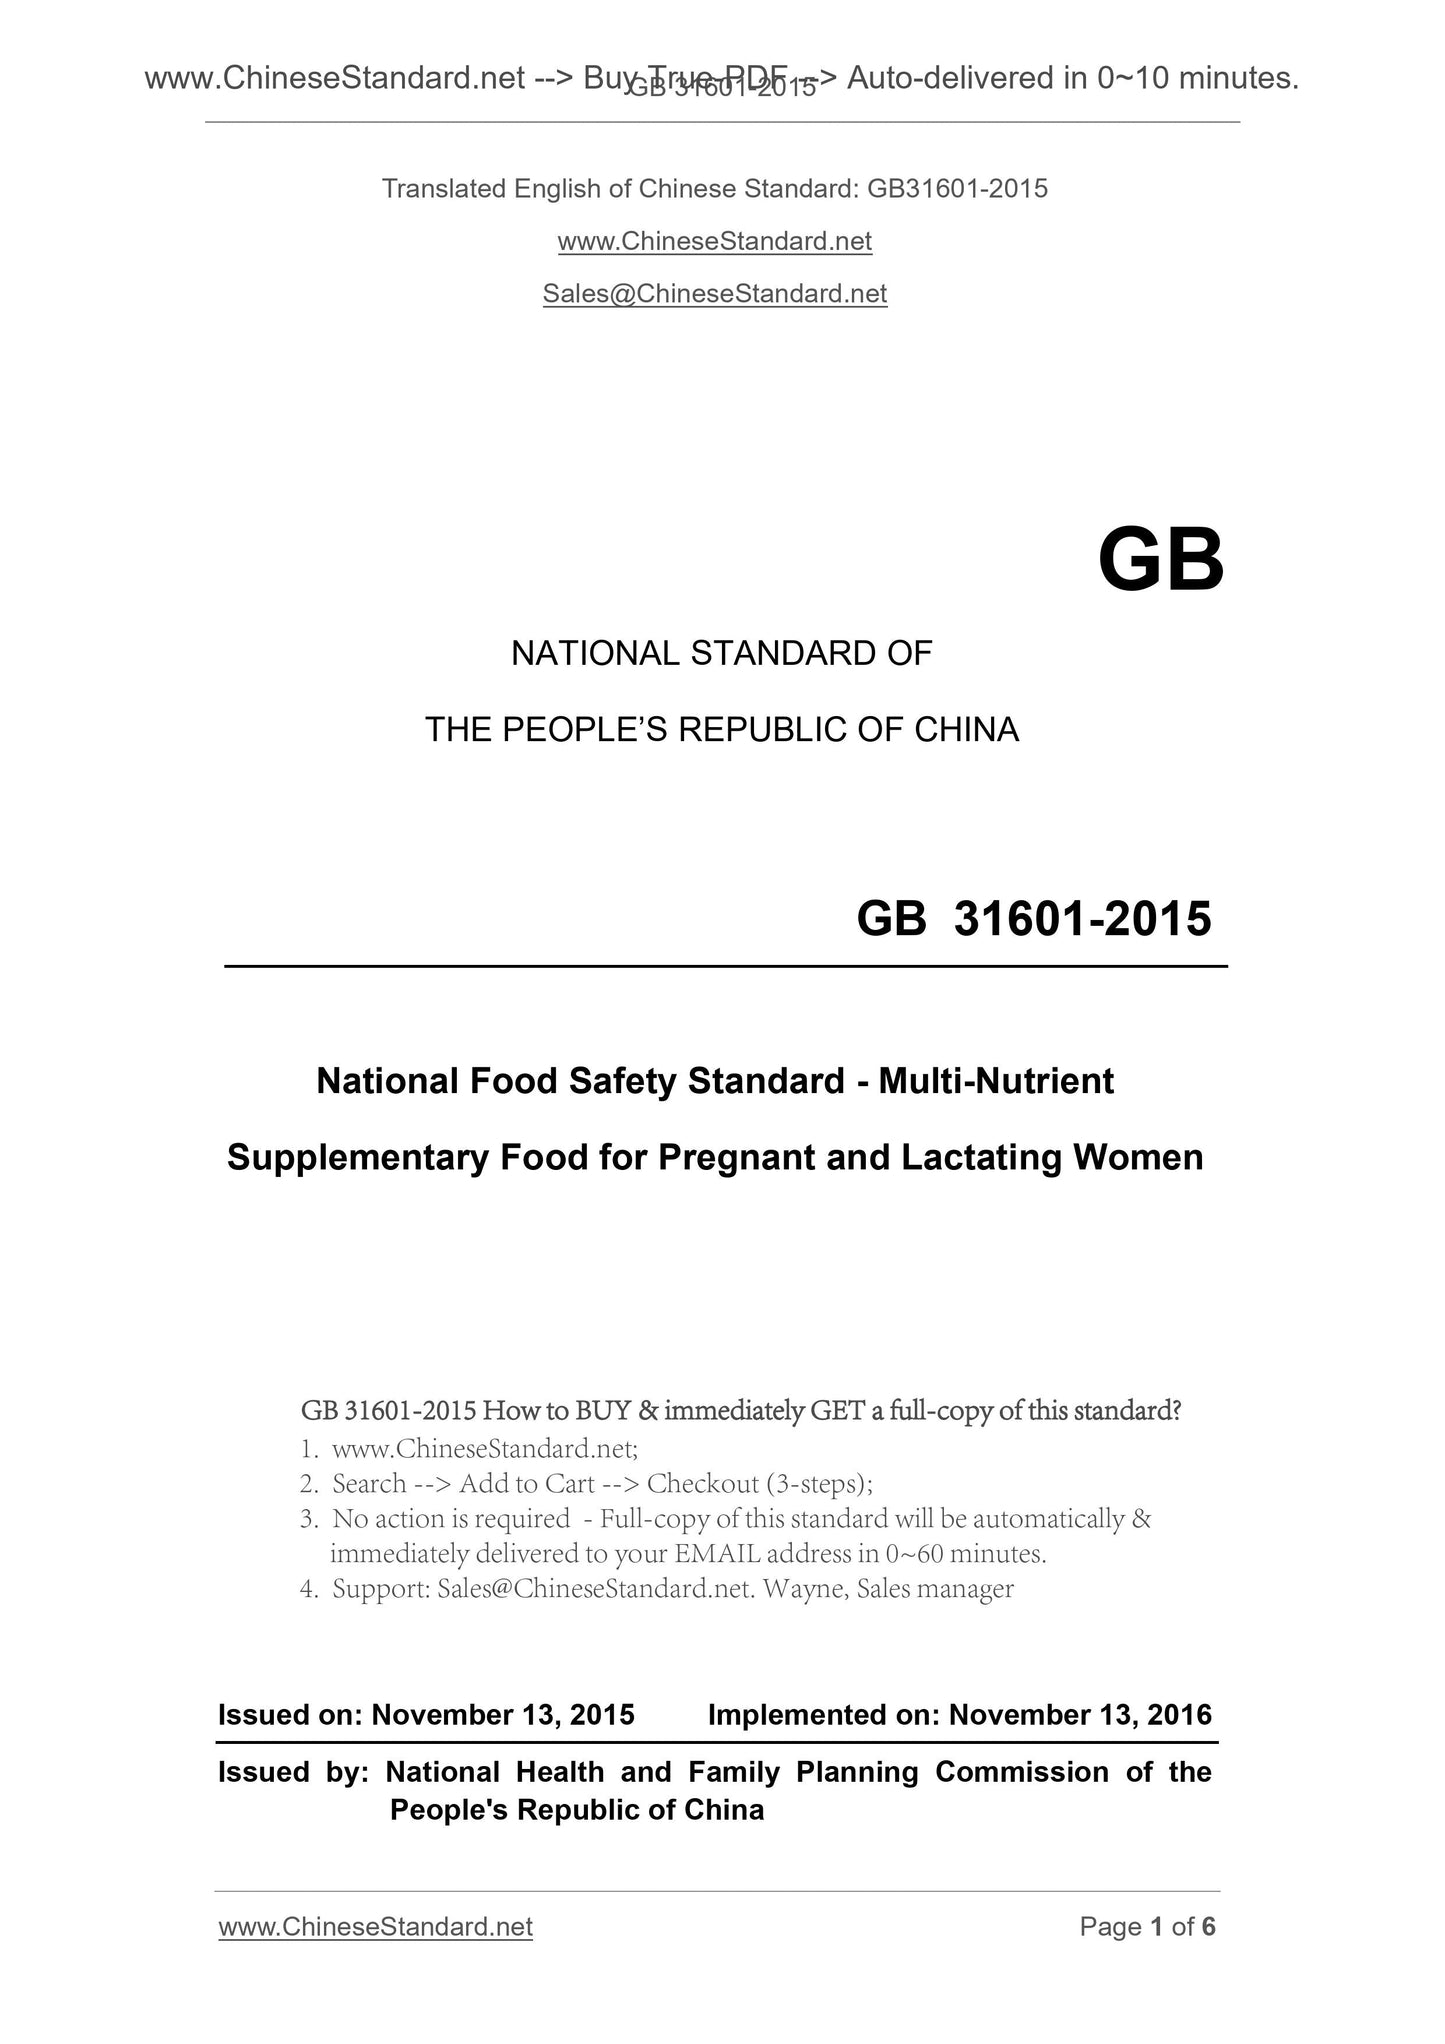 GB 31601-2015 Page 1